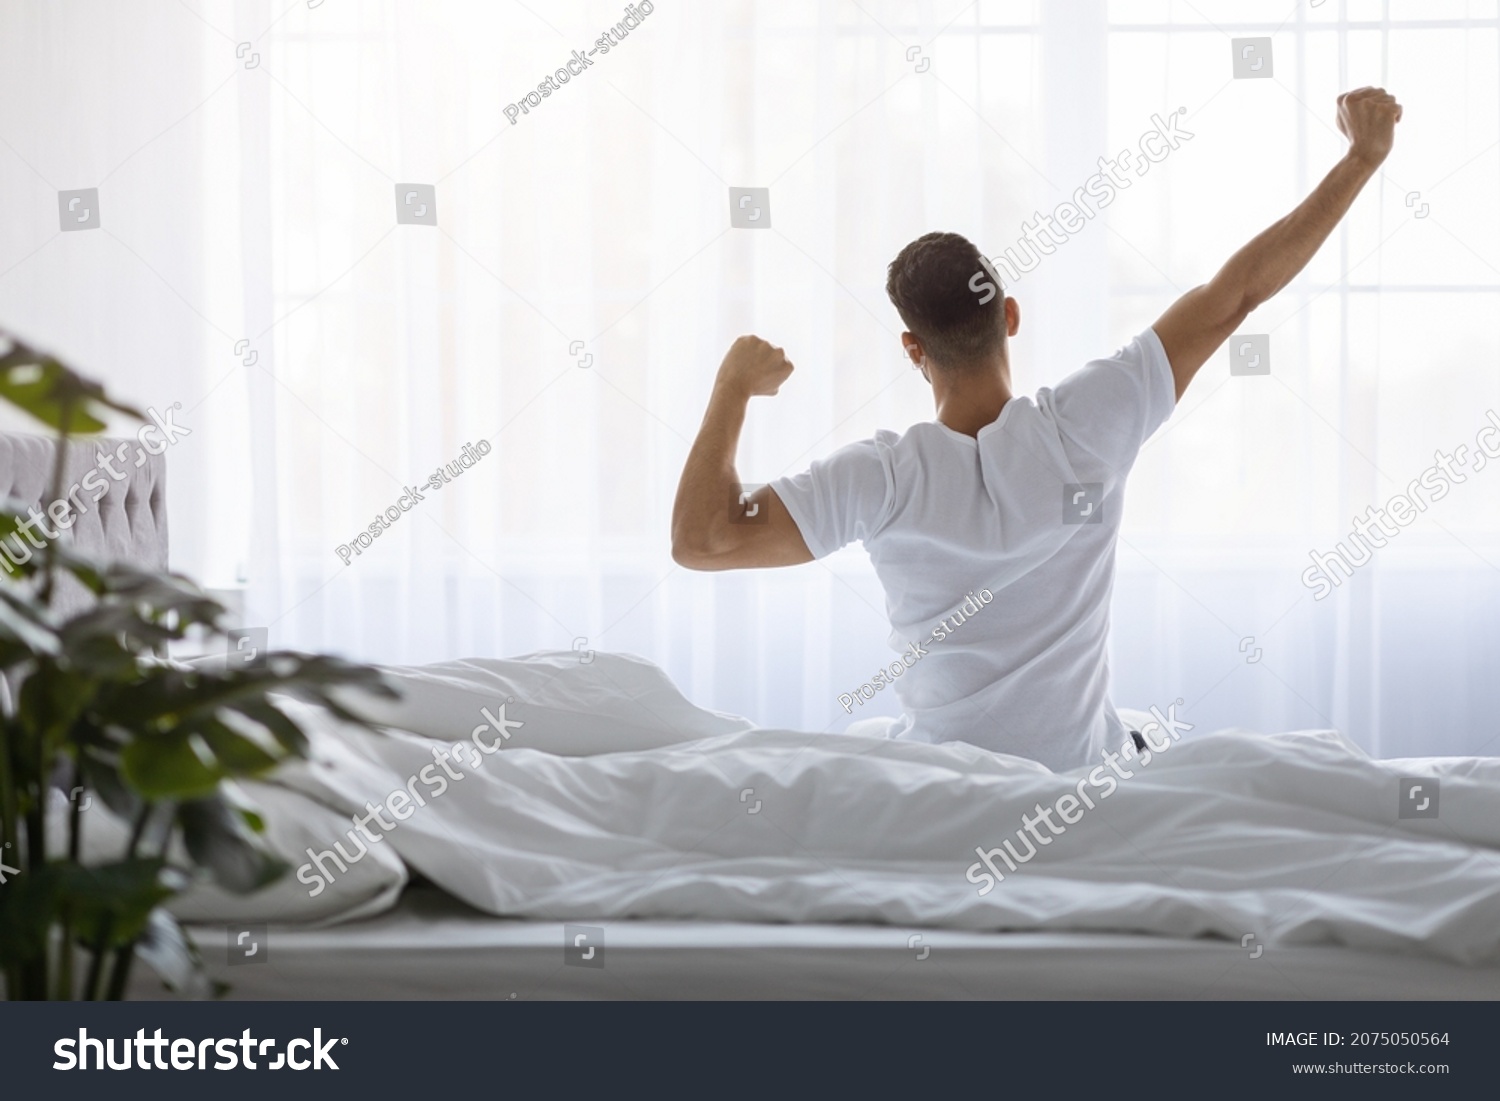 Rear View Of Young Man Stretching In Bed After Waking Up In The Morning, Unrecognizable Male Resting In Light Bedroom After Good Sleep, Looking At Window, Enjoying Start Of New Day, Copy Space #2075050564